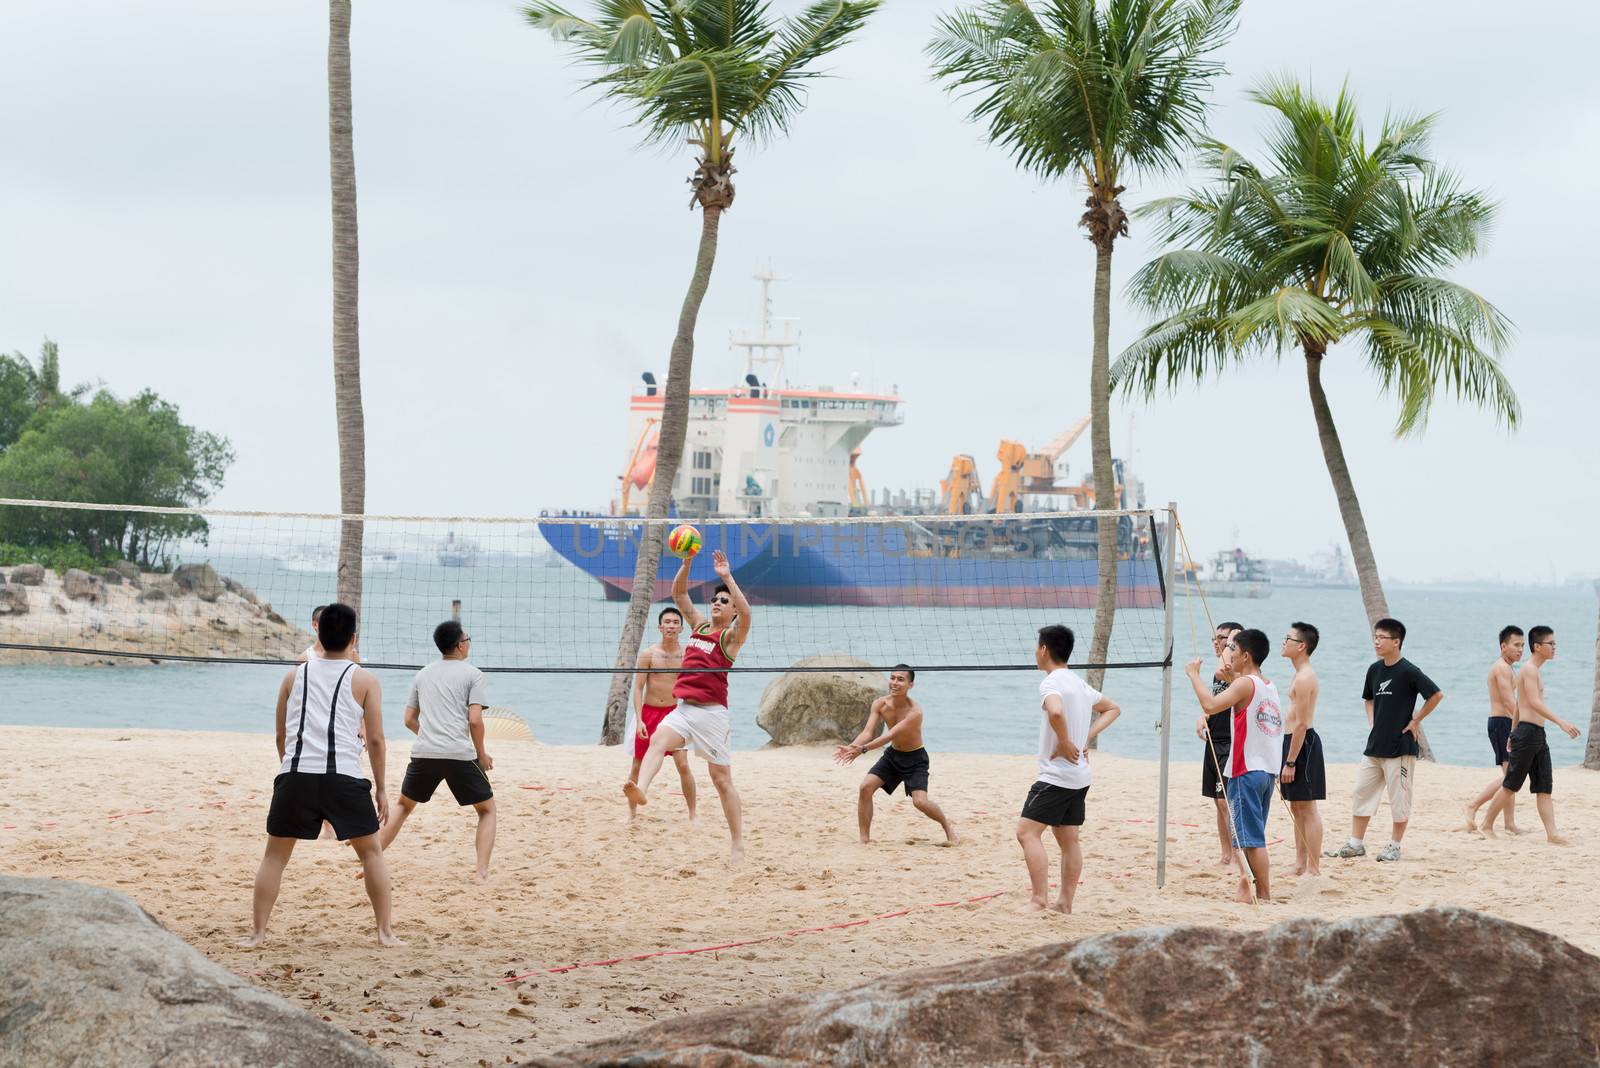 SENTOSA, SINGAPORE - SEP 10: Group of men play volleyball on beach at Sep 10, 2012 on Sentosa, Singapore. Sentosa is a popular island resort, visited by more than five million people a year.